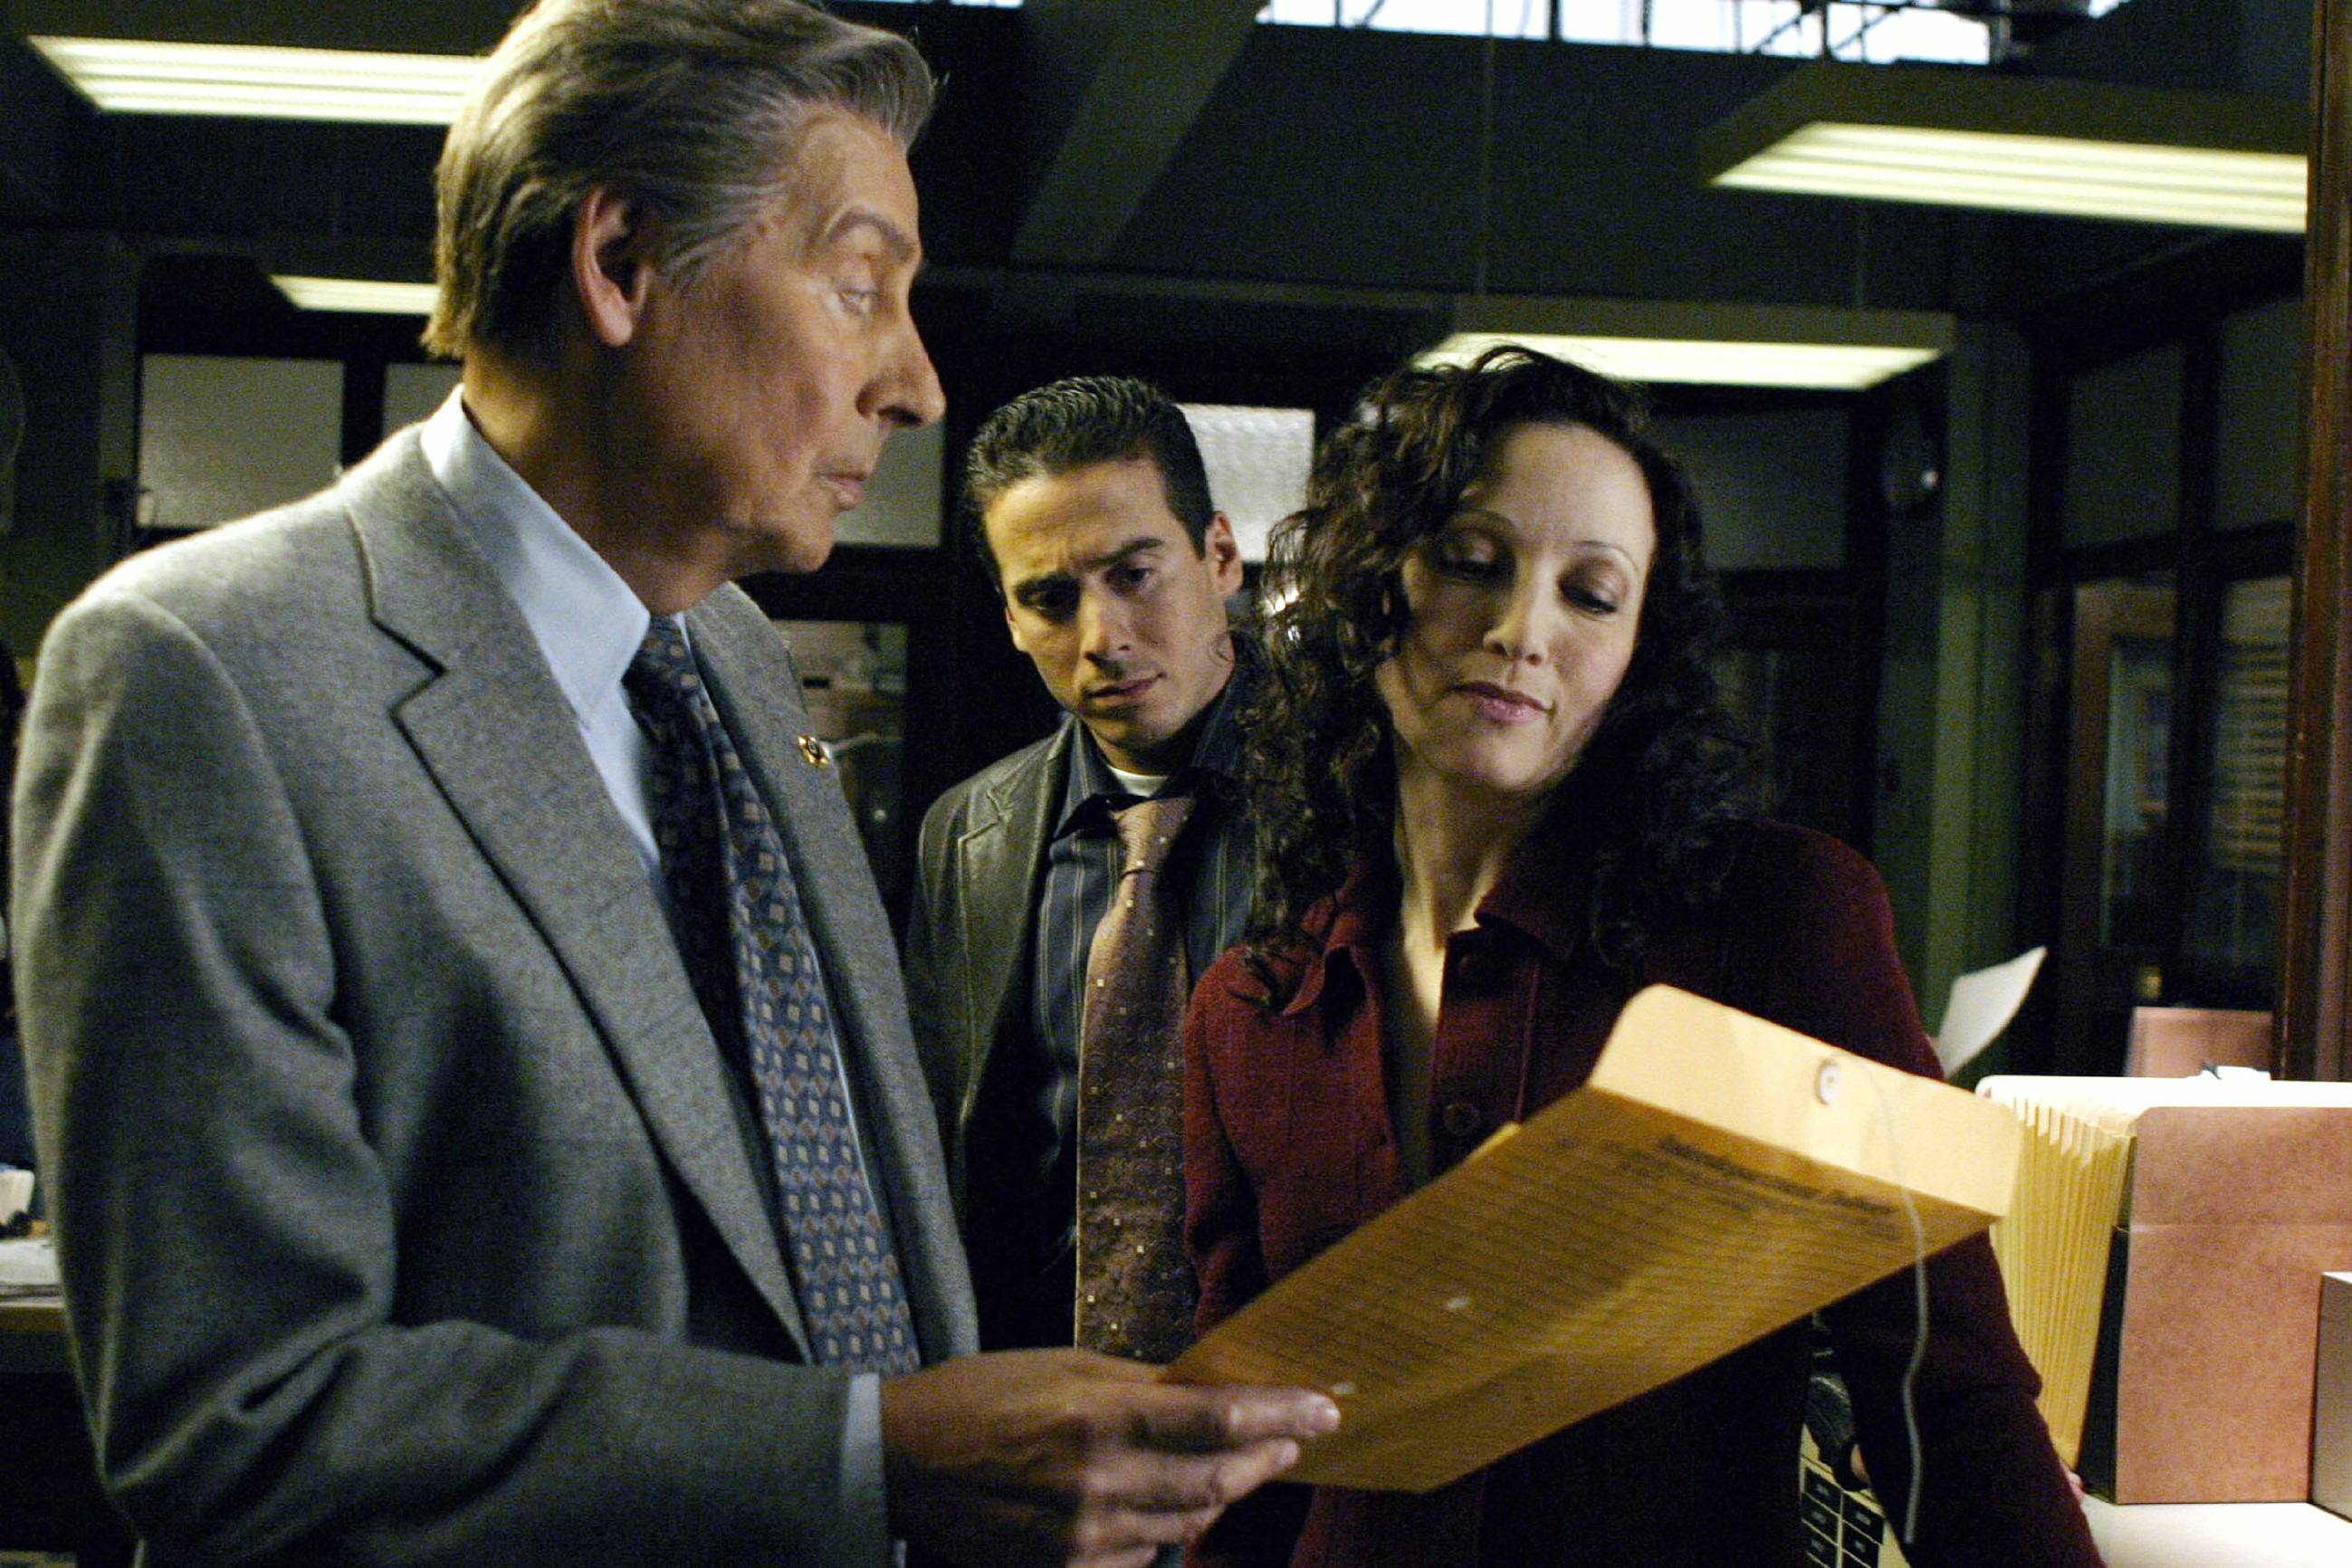 Detectives are looking at a case file on Law & Order: Trial by Jury.